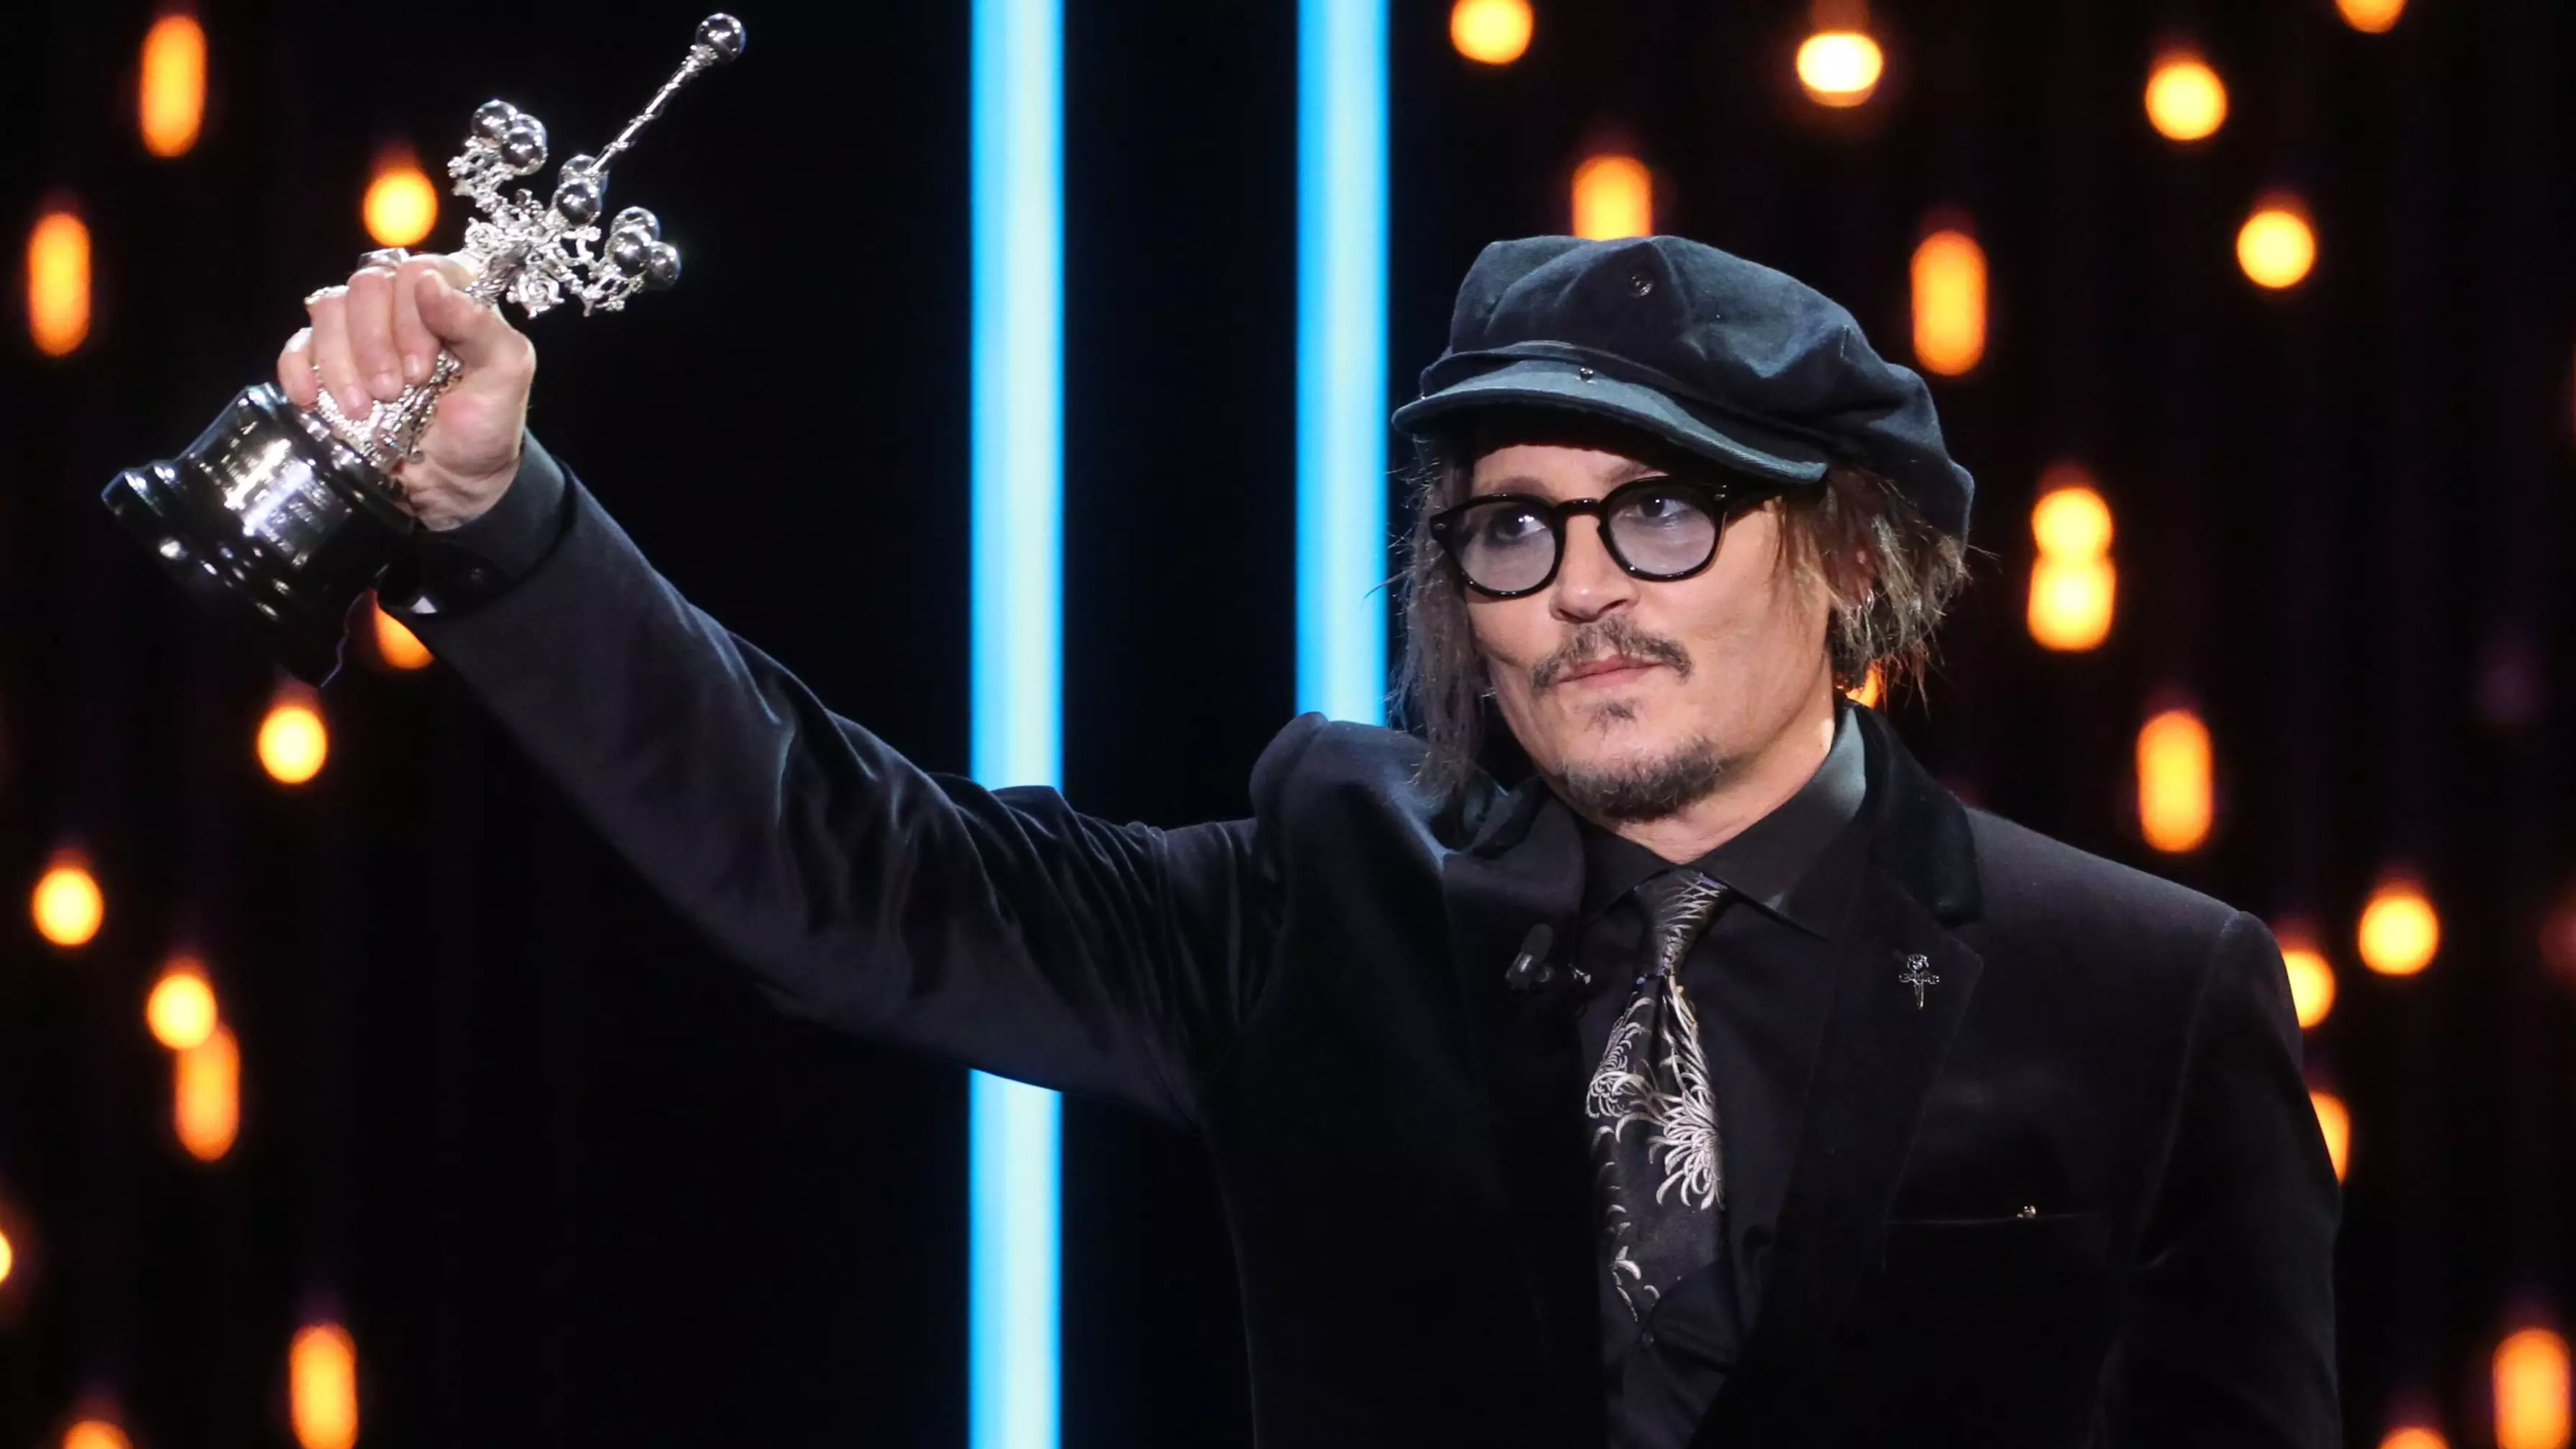 Johnny Depp Says Cancel Culture Is ‘So Far Out Of Hand’ And Warns ‘No One Is Safe’